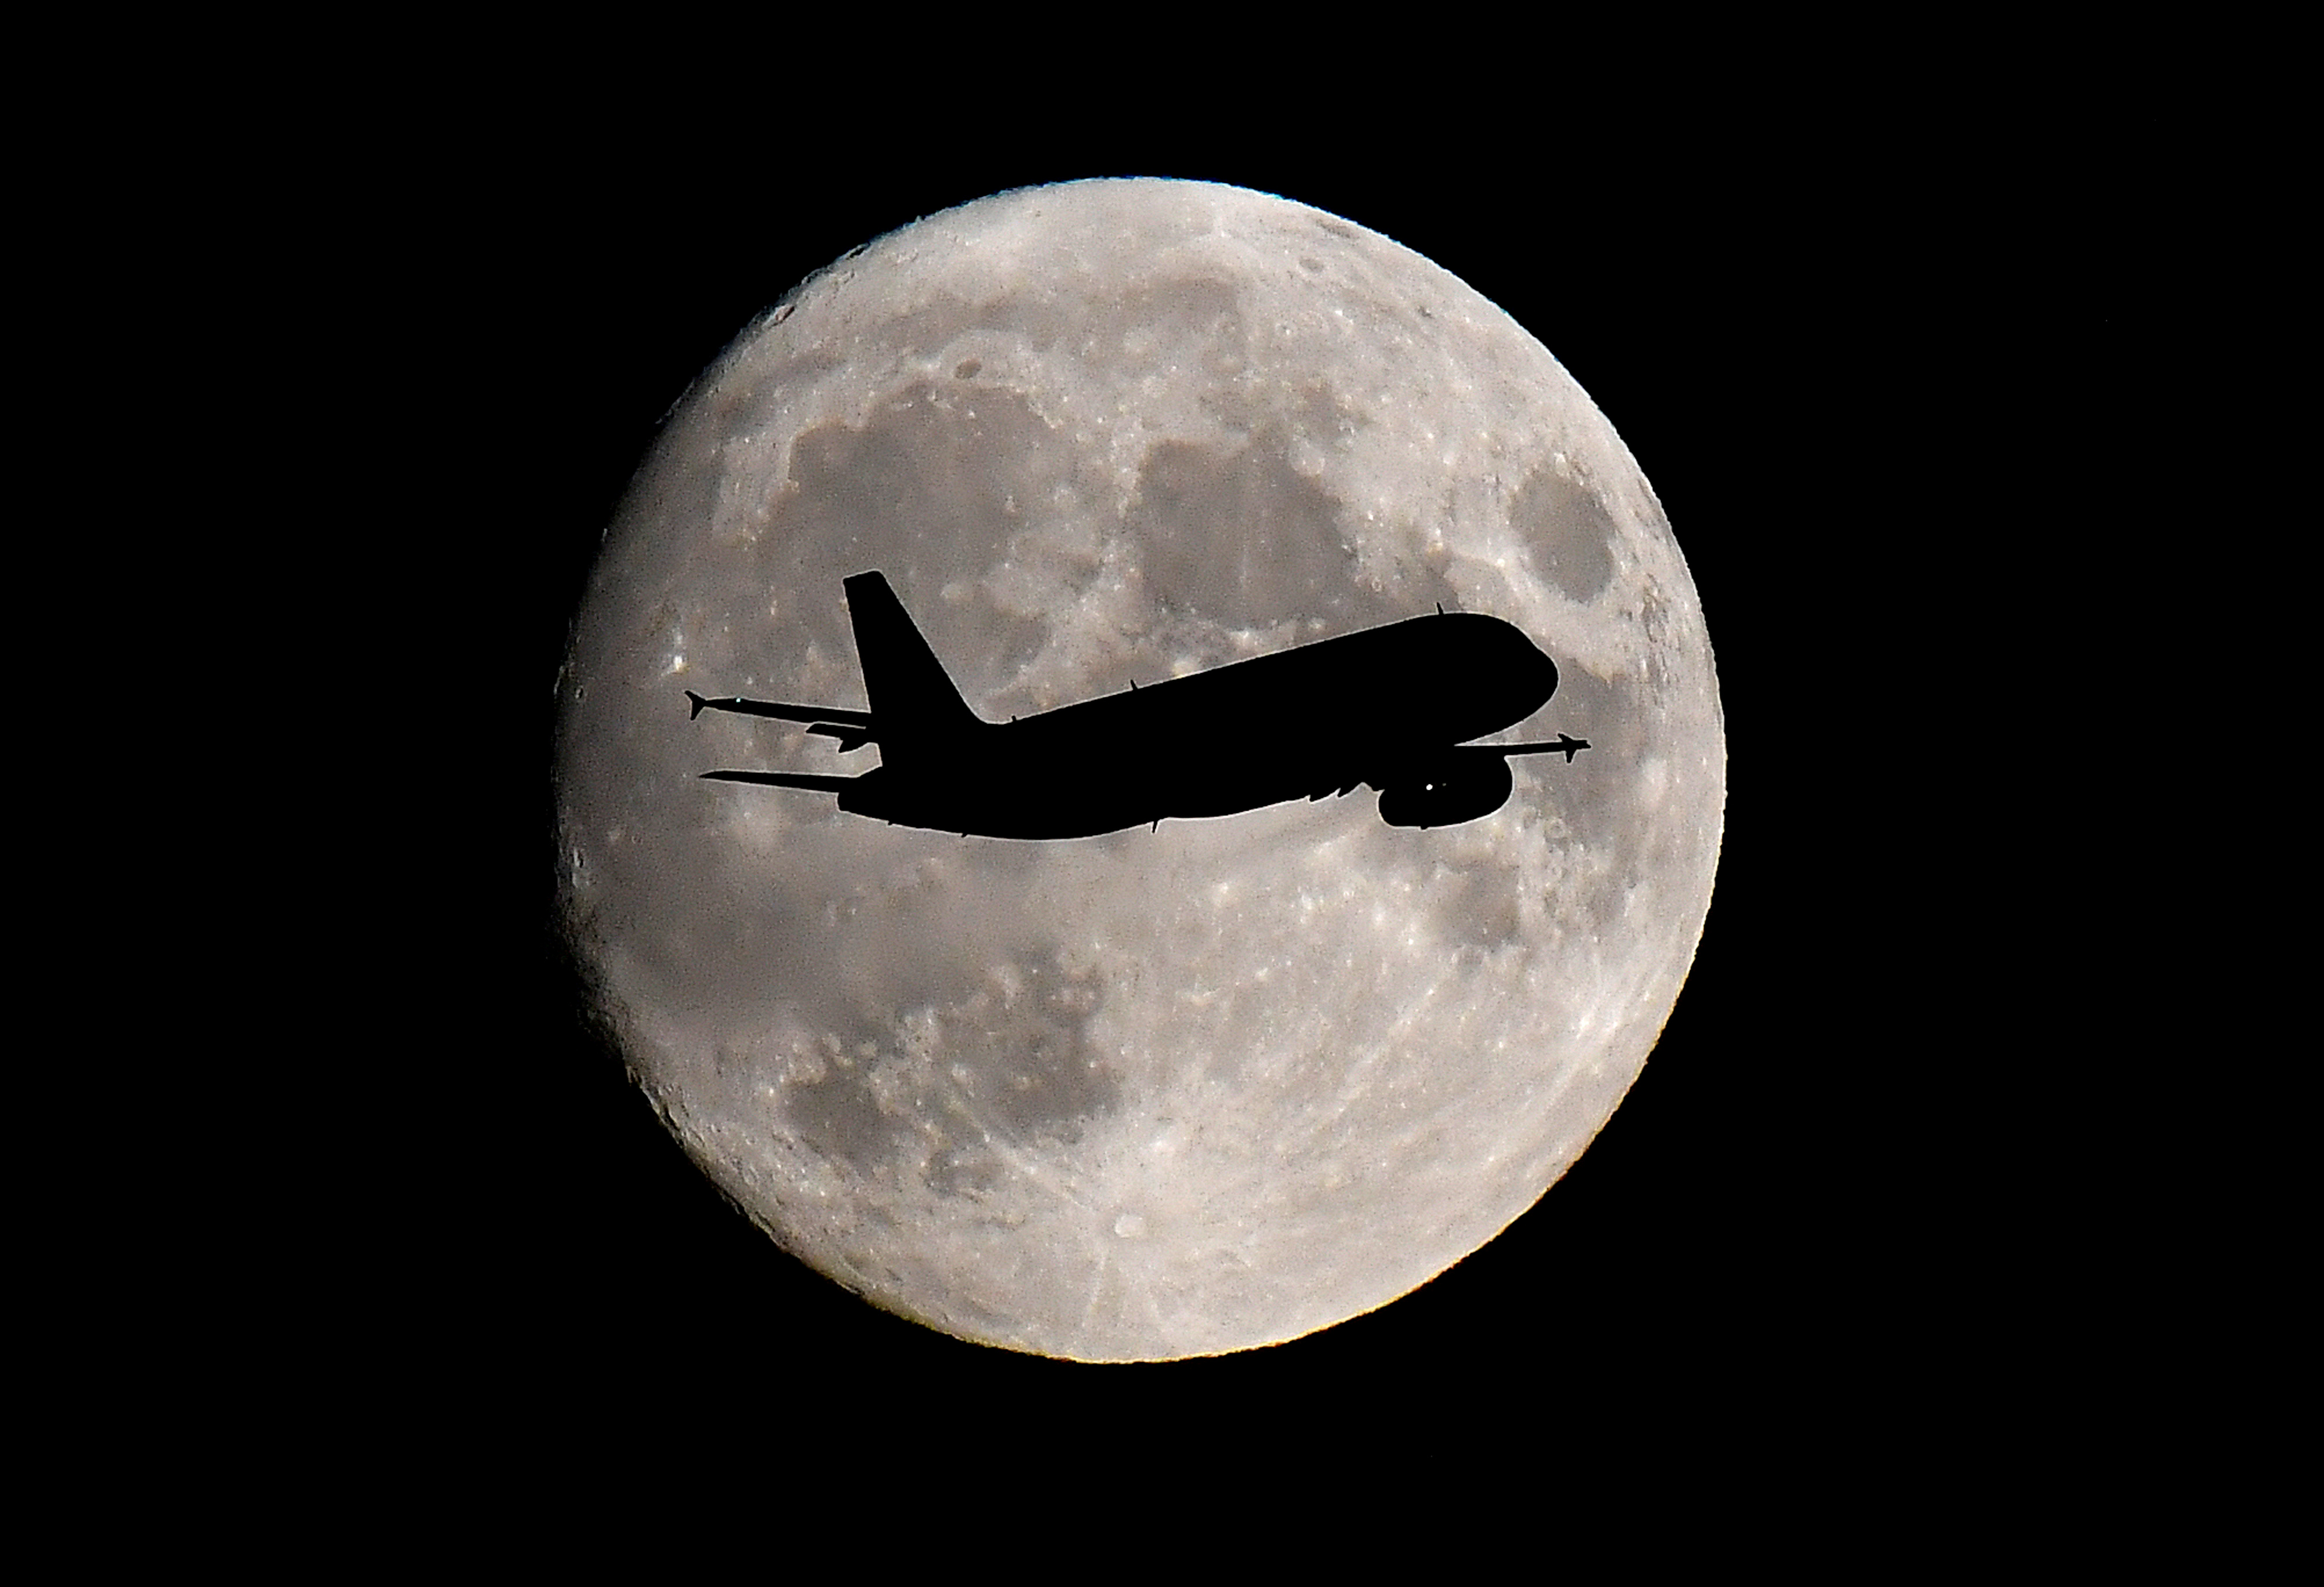 A passenger plane passes in front of the moon as it makes its final landing approach to Heathrow Airport in London